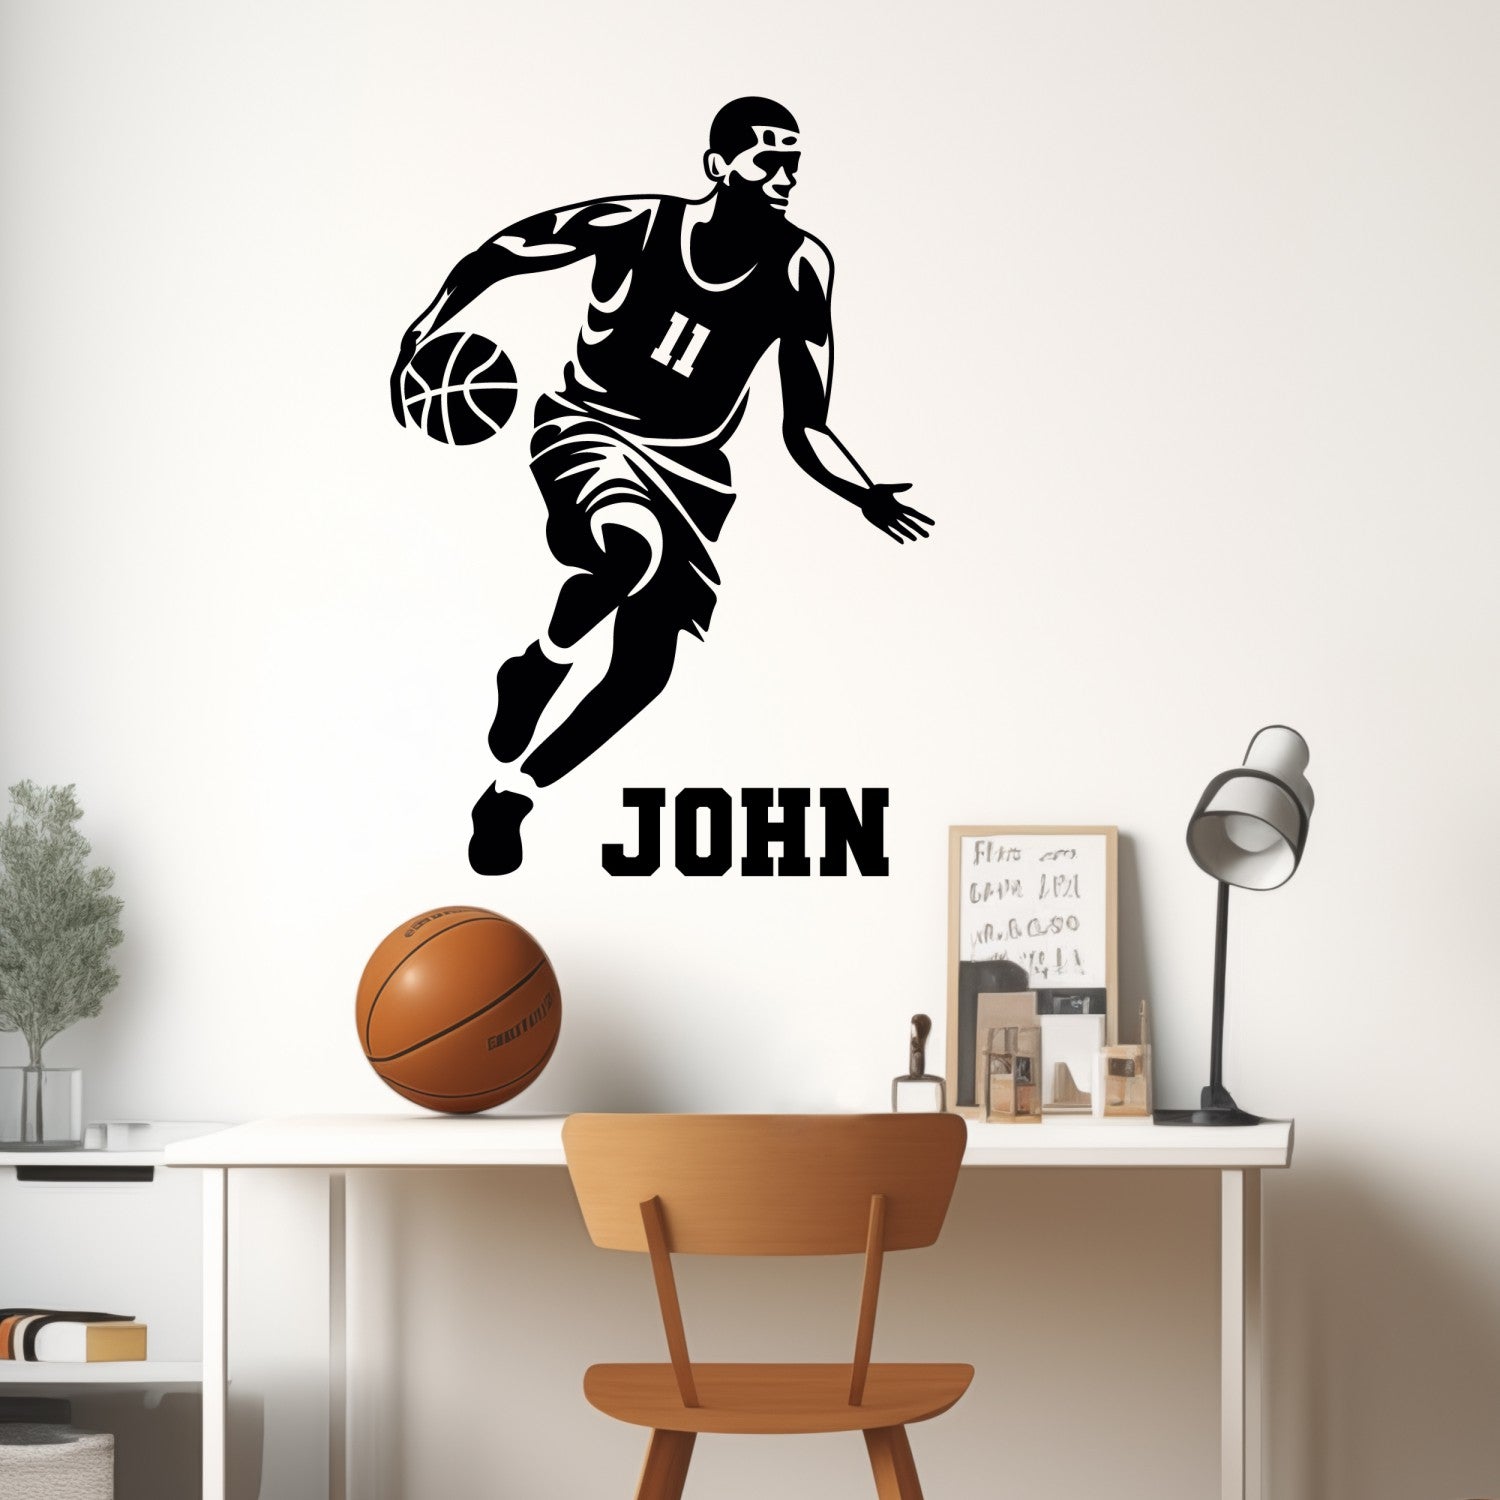 Personalized Basketball Player Decal - Basketball Decor for Boys Room - Sport Wall Stickers for Bedroom - Basketball Wall Decor for Boys Room